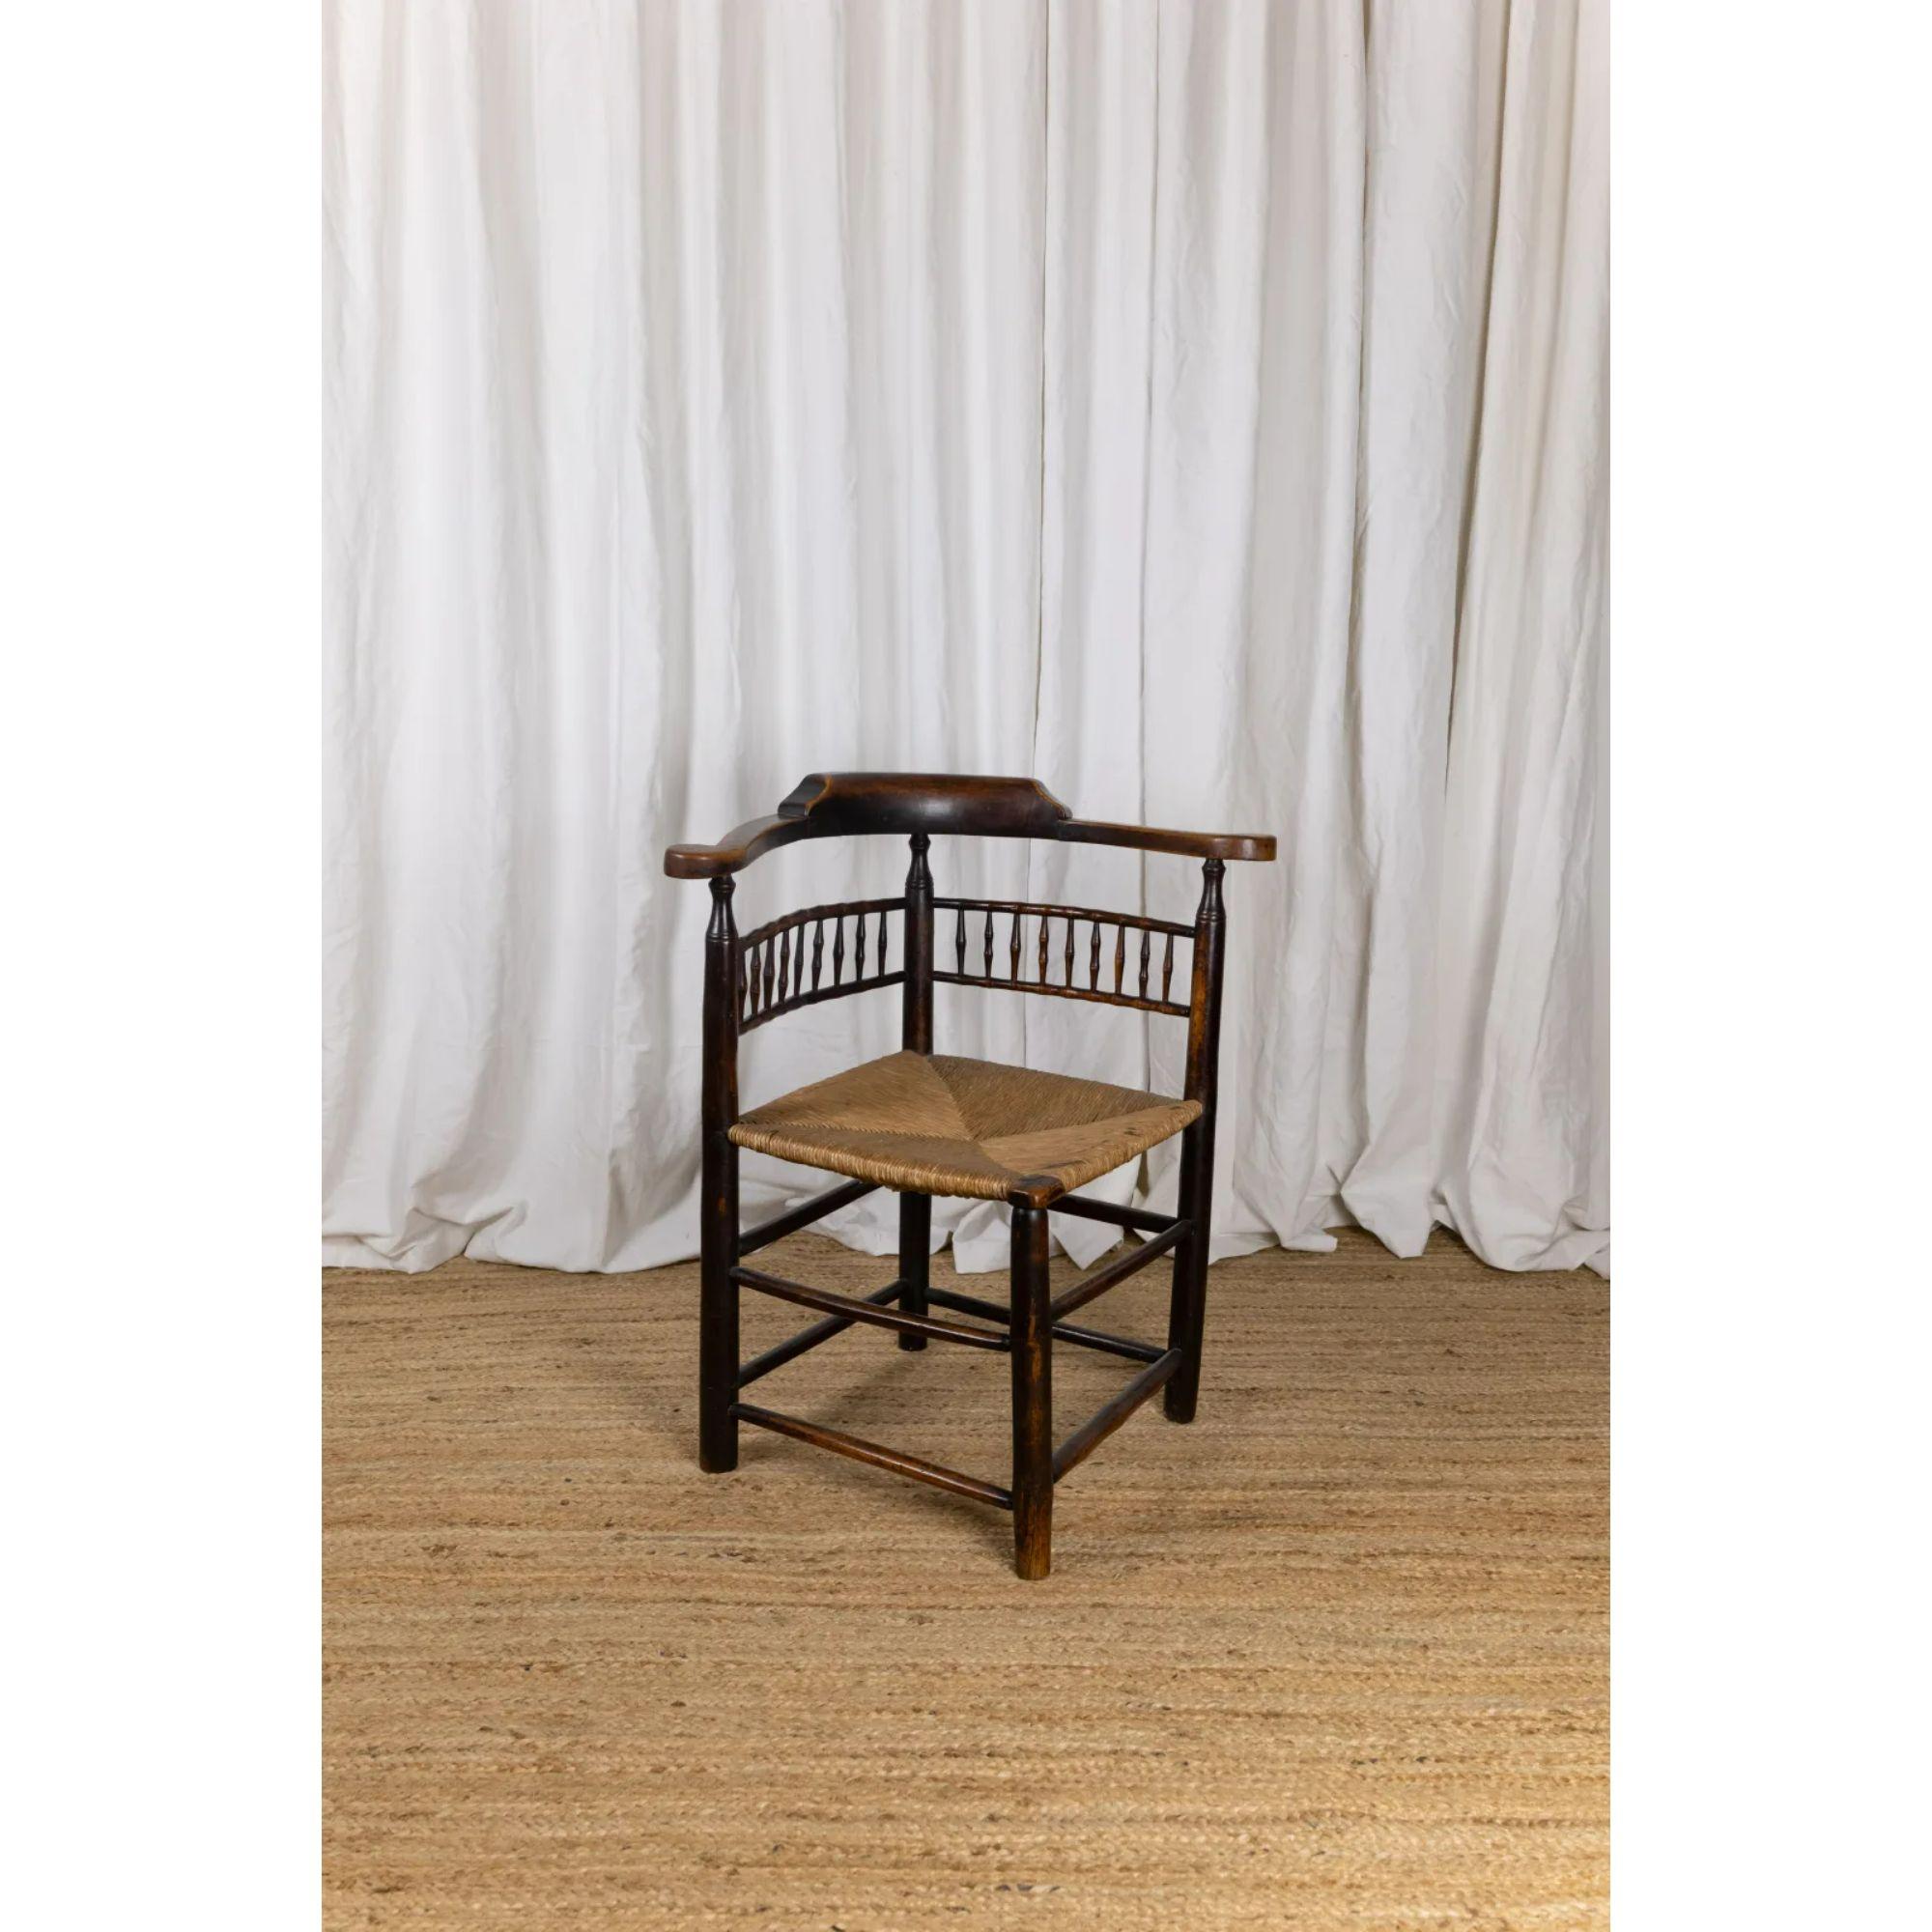 English Elm Corner chair, Early 19th Century

An early 19th Century corner chair made in elm with a rush seat and an unusual simulated bamboo details in the seat back.

A lovely example of a totally hand made country chair with a deep overall